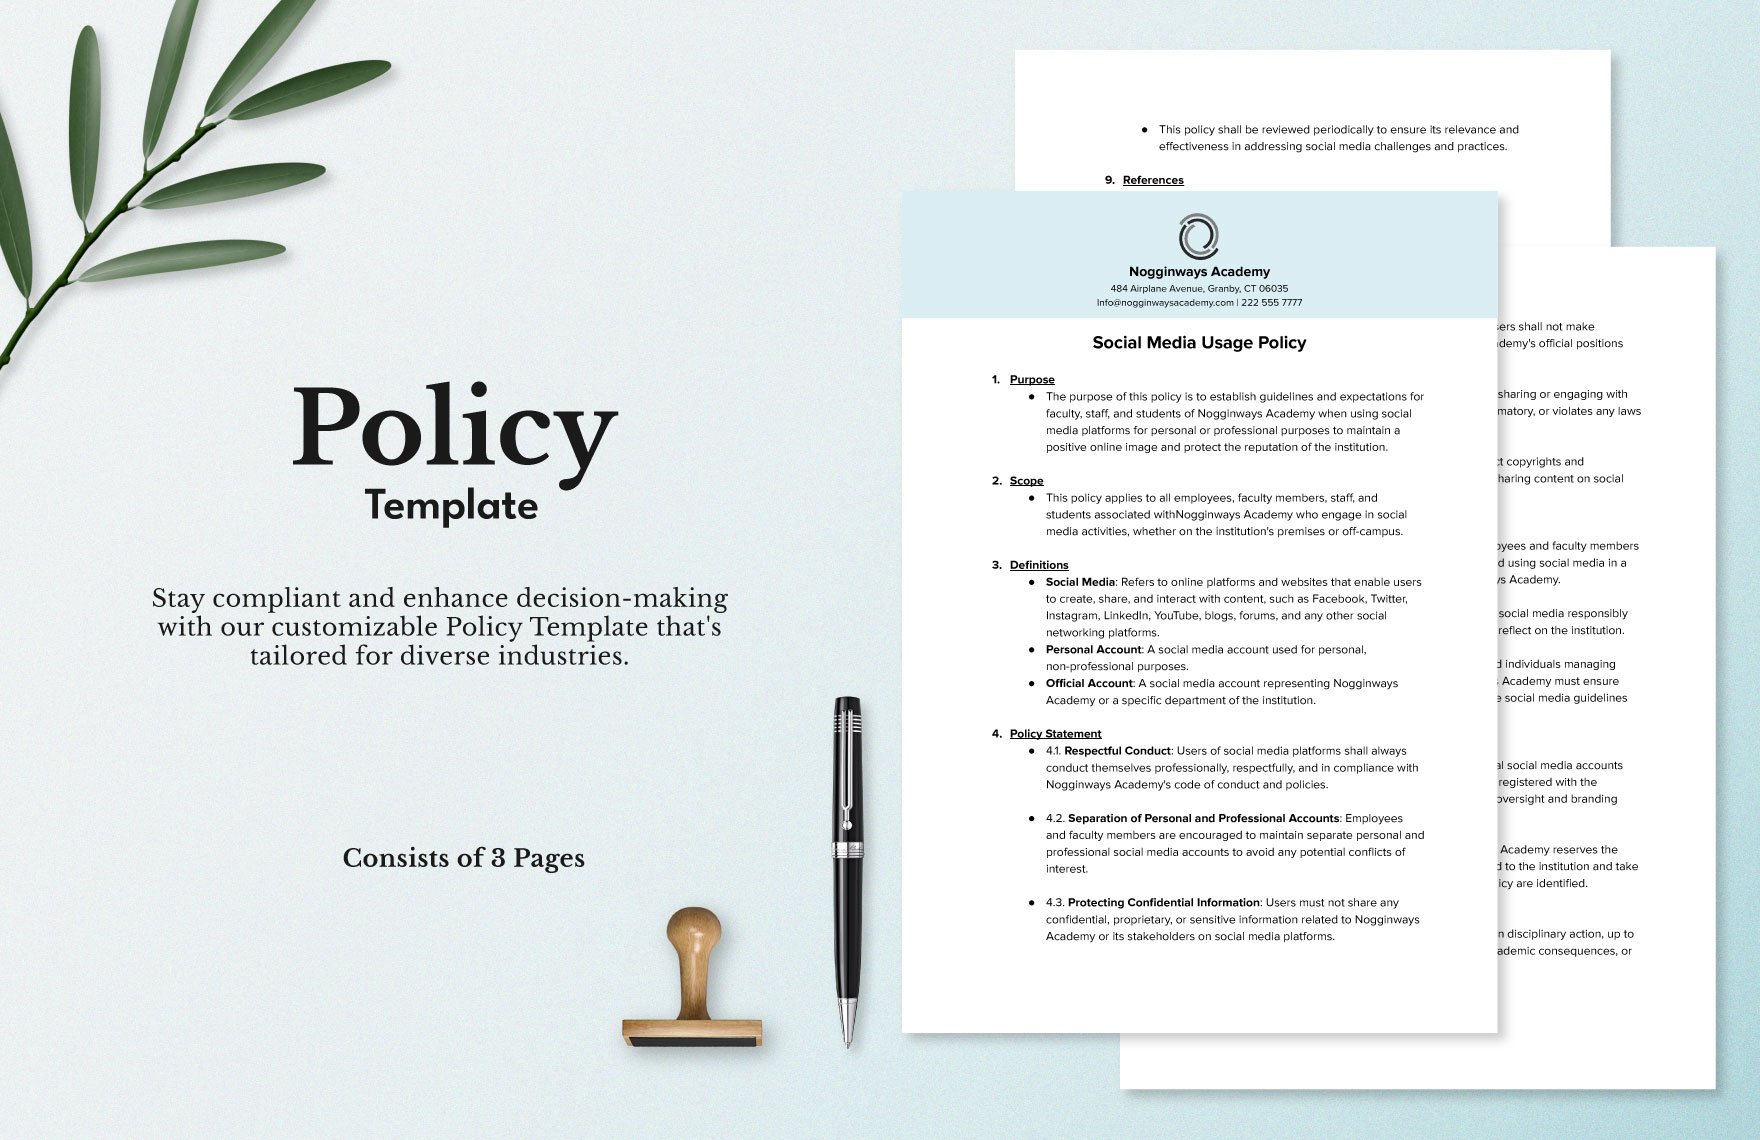 Policy Template